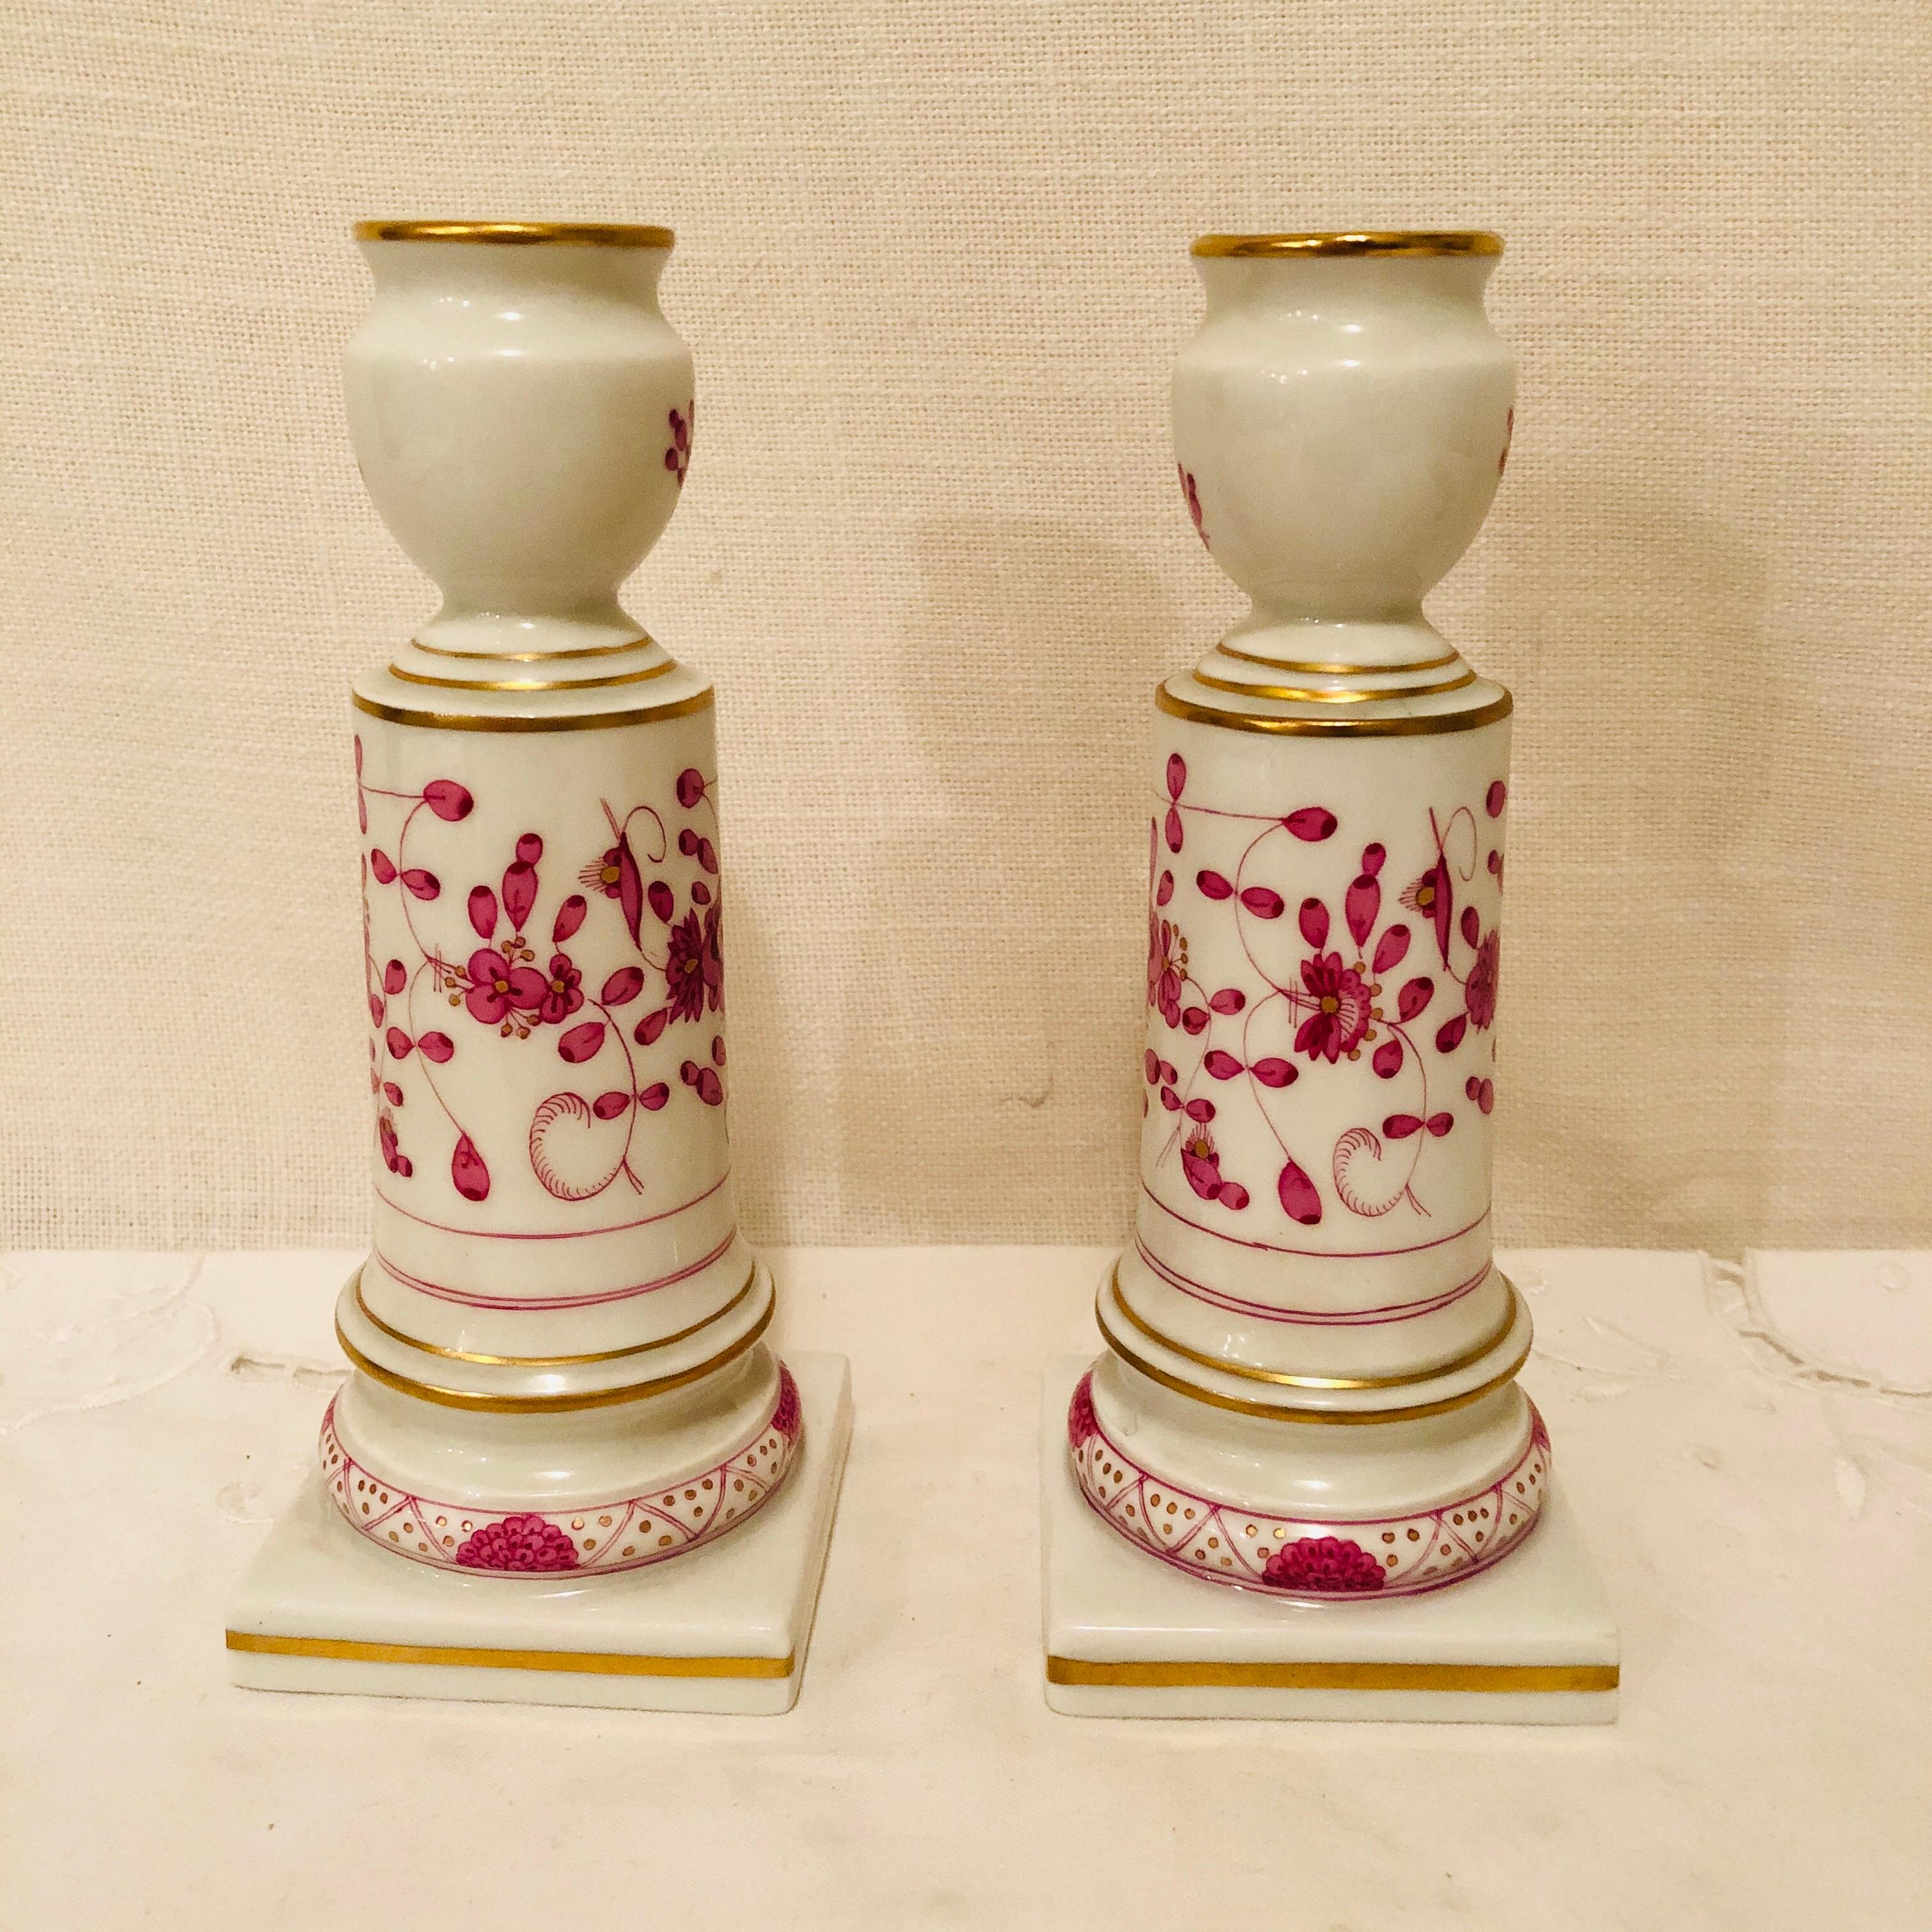 We want to offer you this pair of Meissen purple Indian candlesticks. The Meissen purple Indian pattern is one of the most beautiful patterns that the Meissen porcelain company makes, these candlesticks are just the right size for your table, as